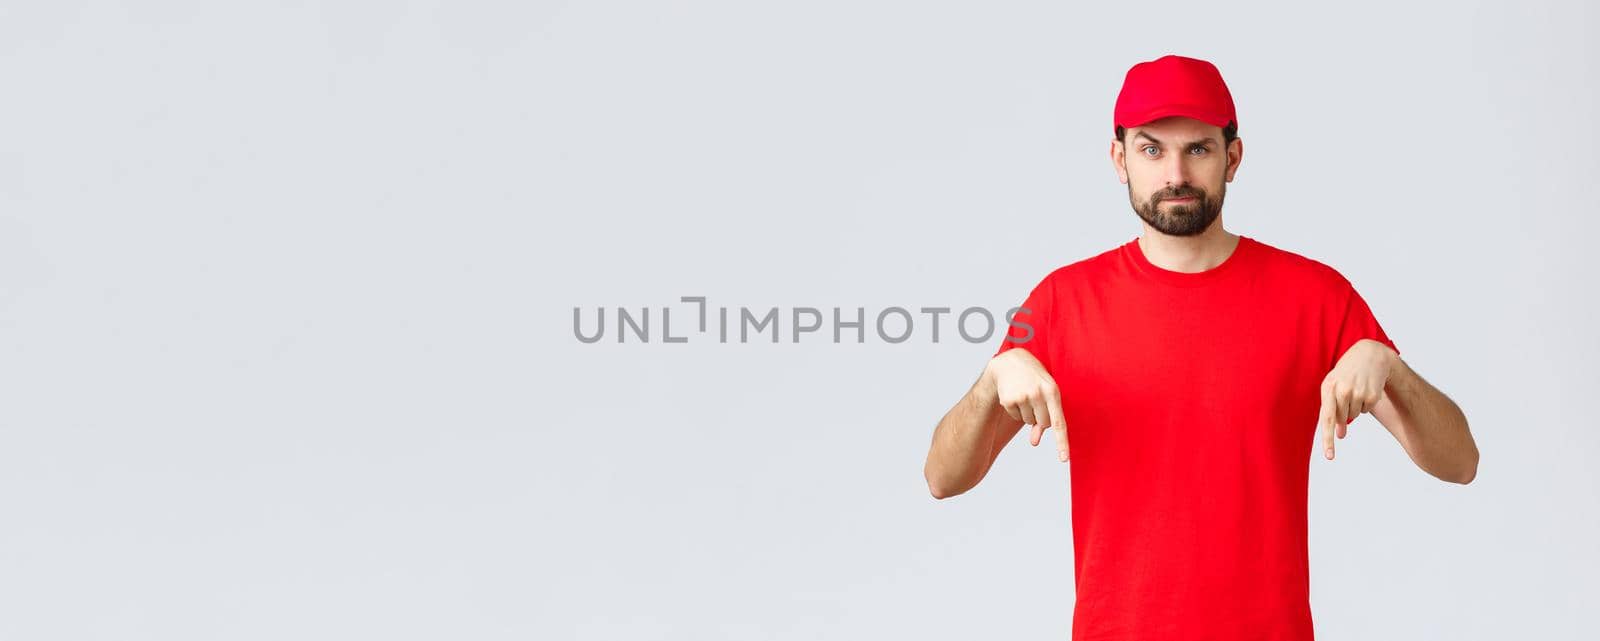 Online shopping, delivery during quarantine and takeaway concept. Skeptical or suspicious courier in red uniform cap and t-shirt, pointing fingers down, standing grey background.